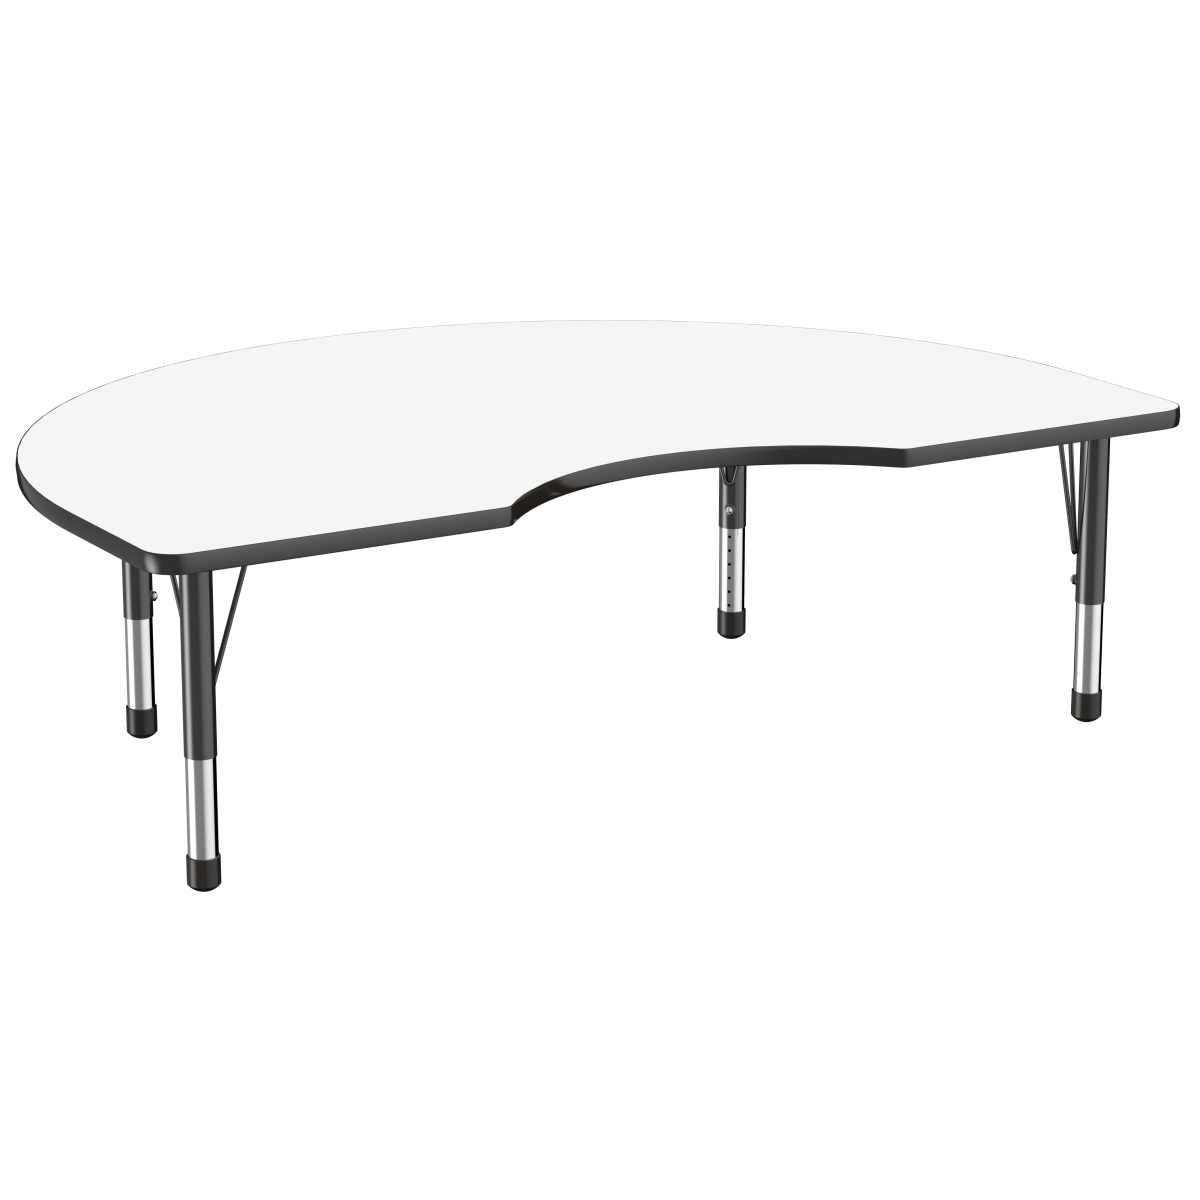 10239-debk 48 X 72 In. Kidney Dry-erase Adjustable Activity Table With Chunky Leg - Black